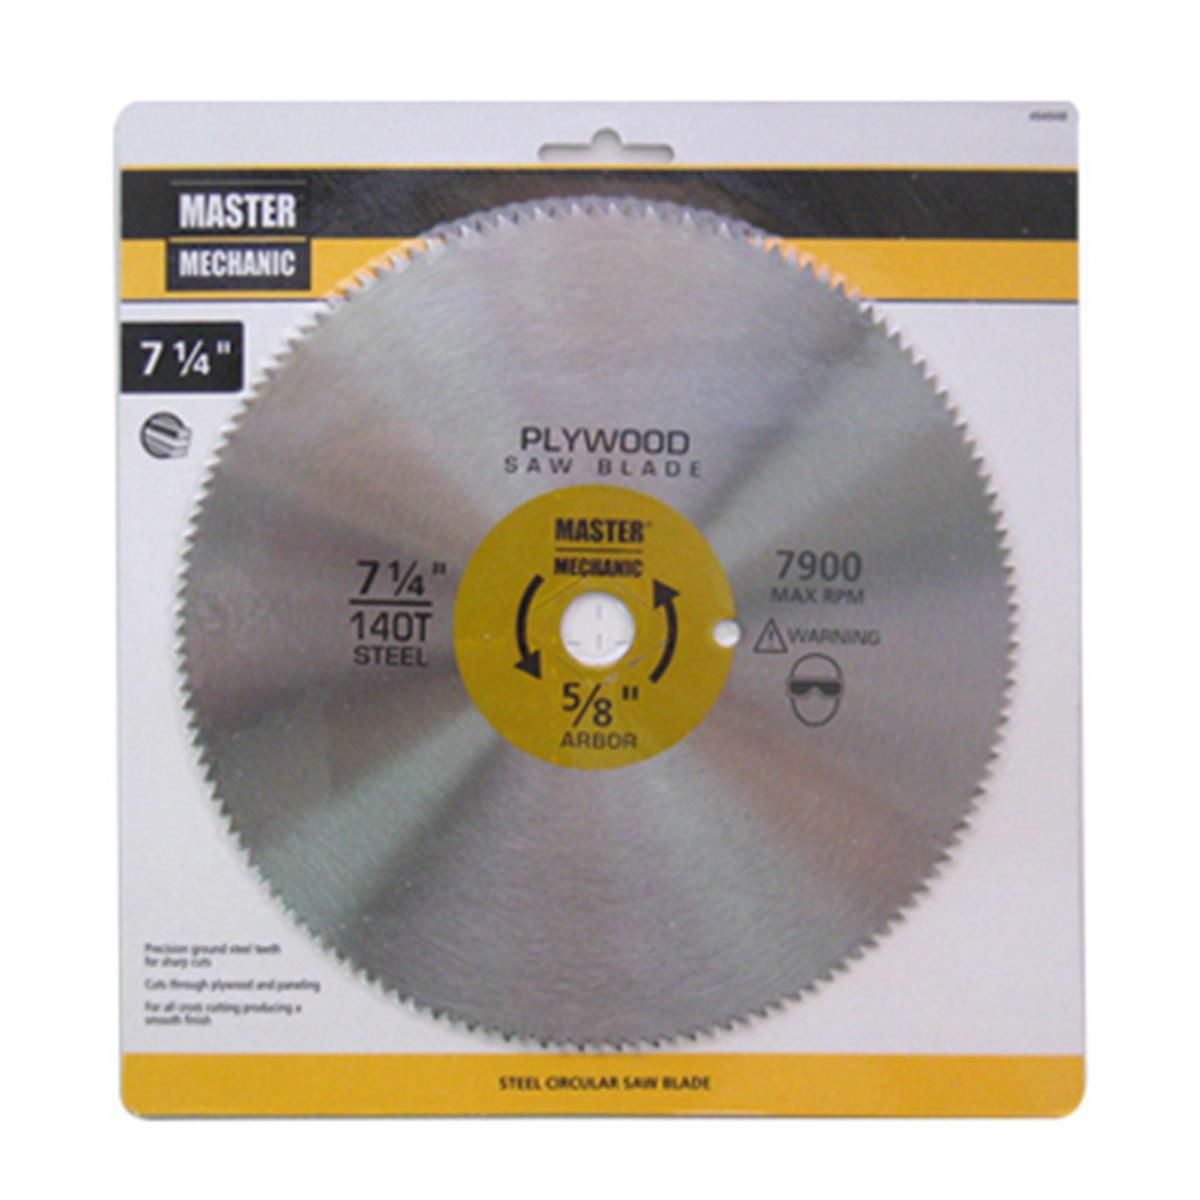 Image for Disston 494948 7.25 in. Master Mechanic Plywood - Paneling Blade, 140 Tooth at Kohl's.